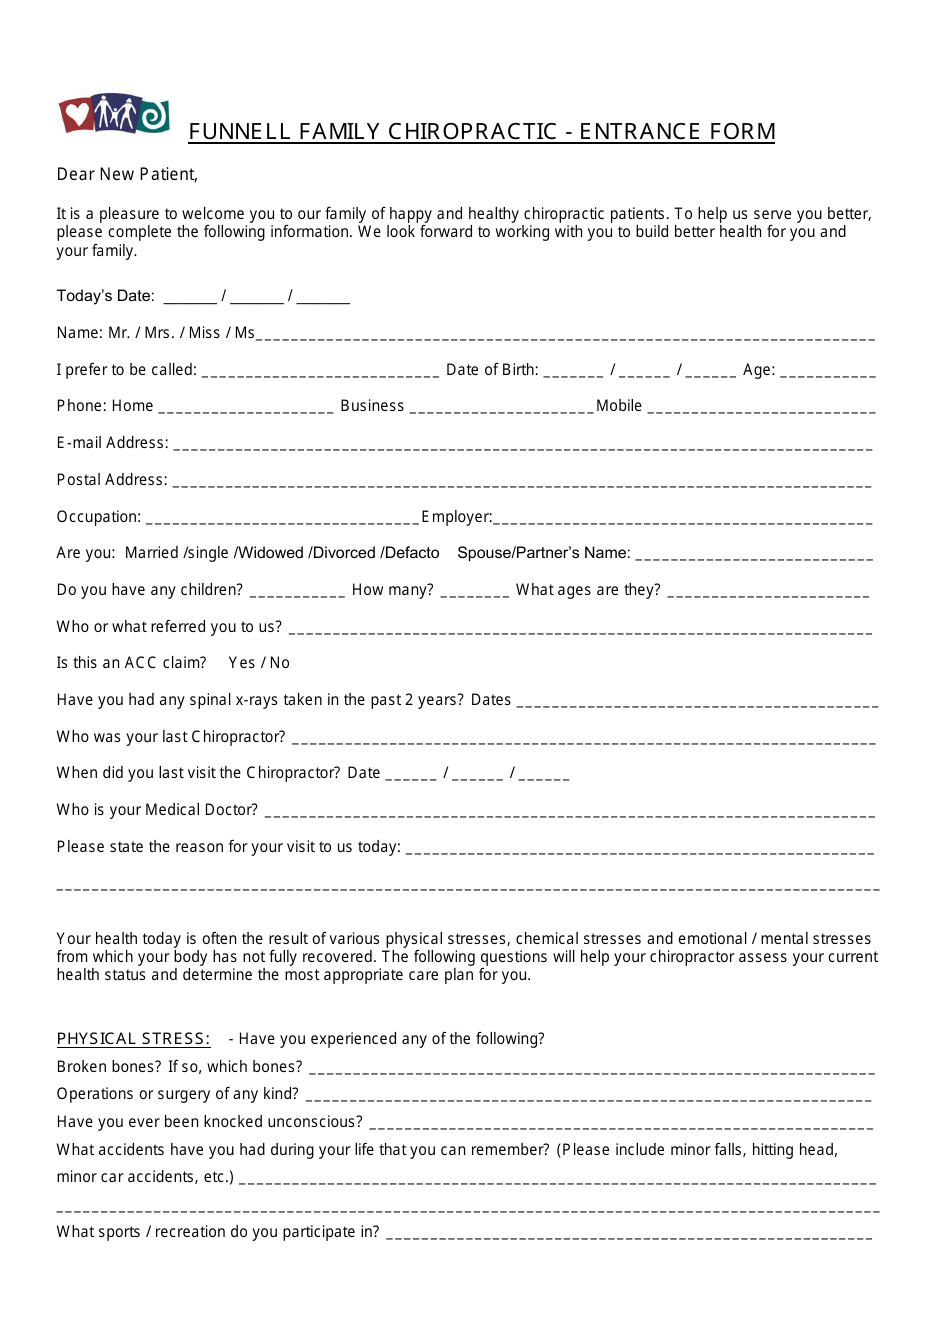 Chiropractic Patient Entrance Form - Funnel Family Chiropractic, Page 1